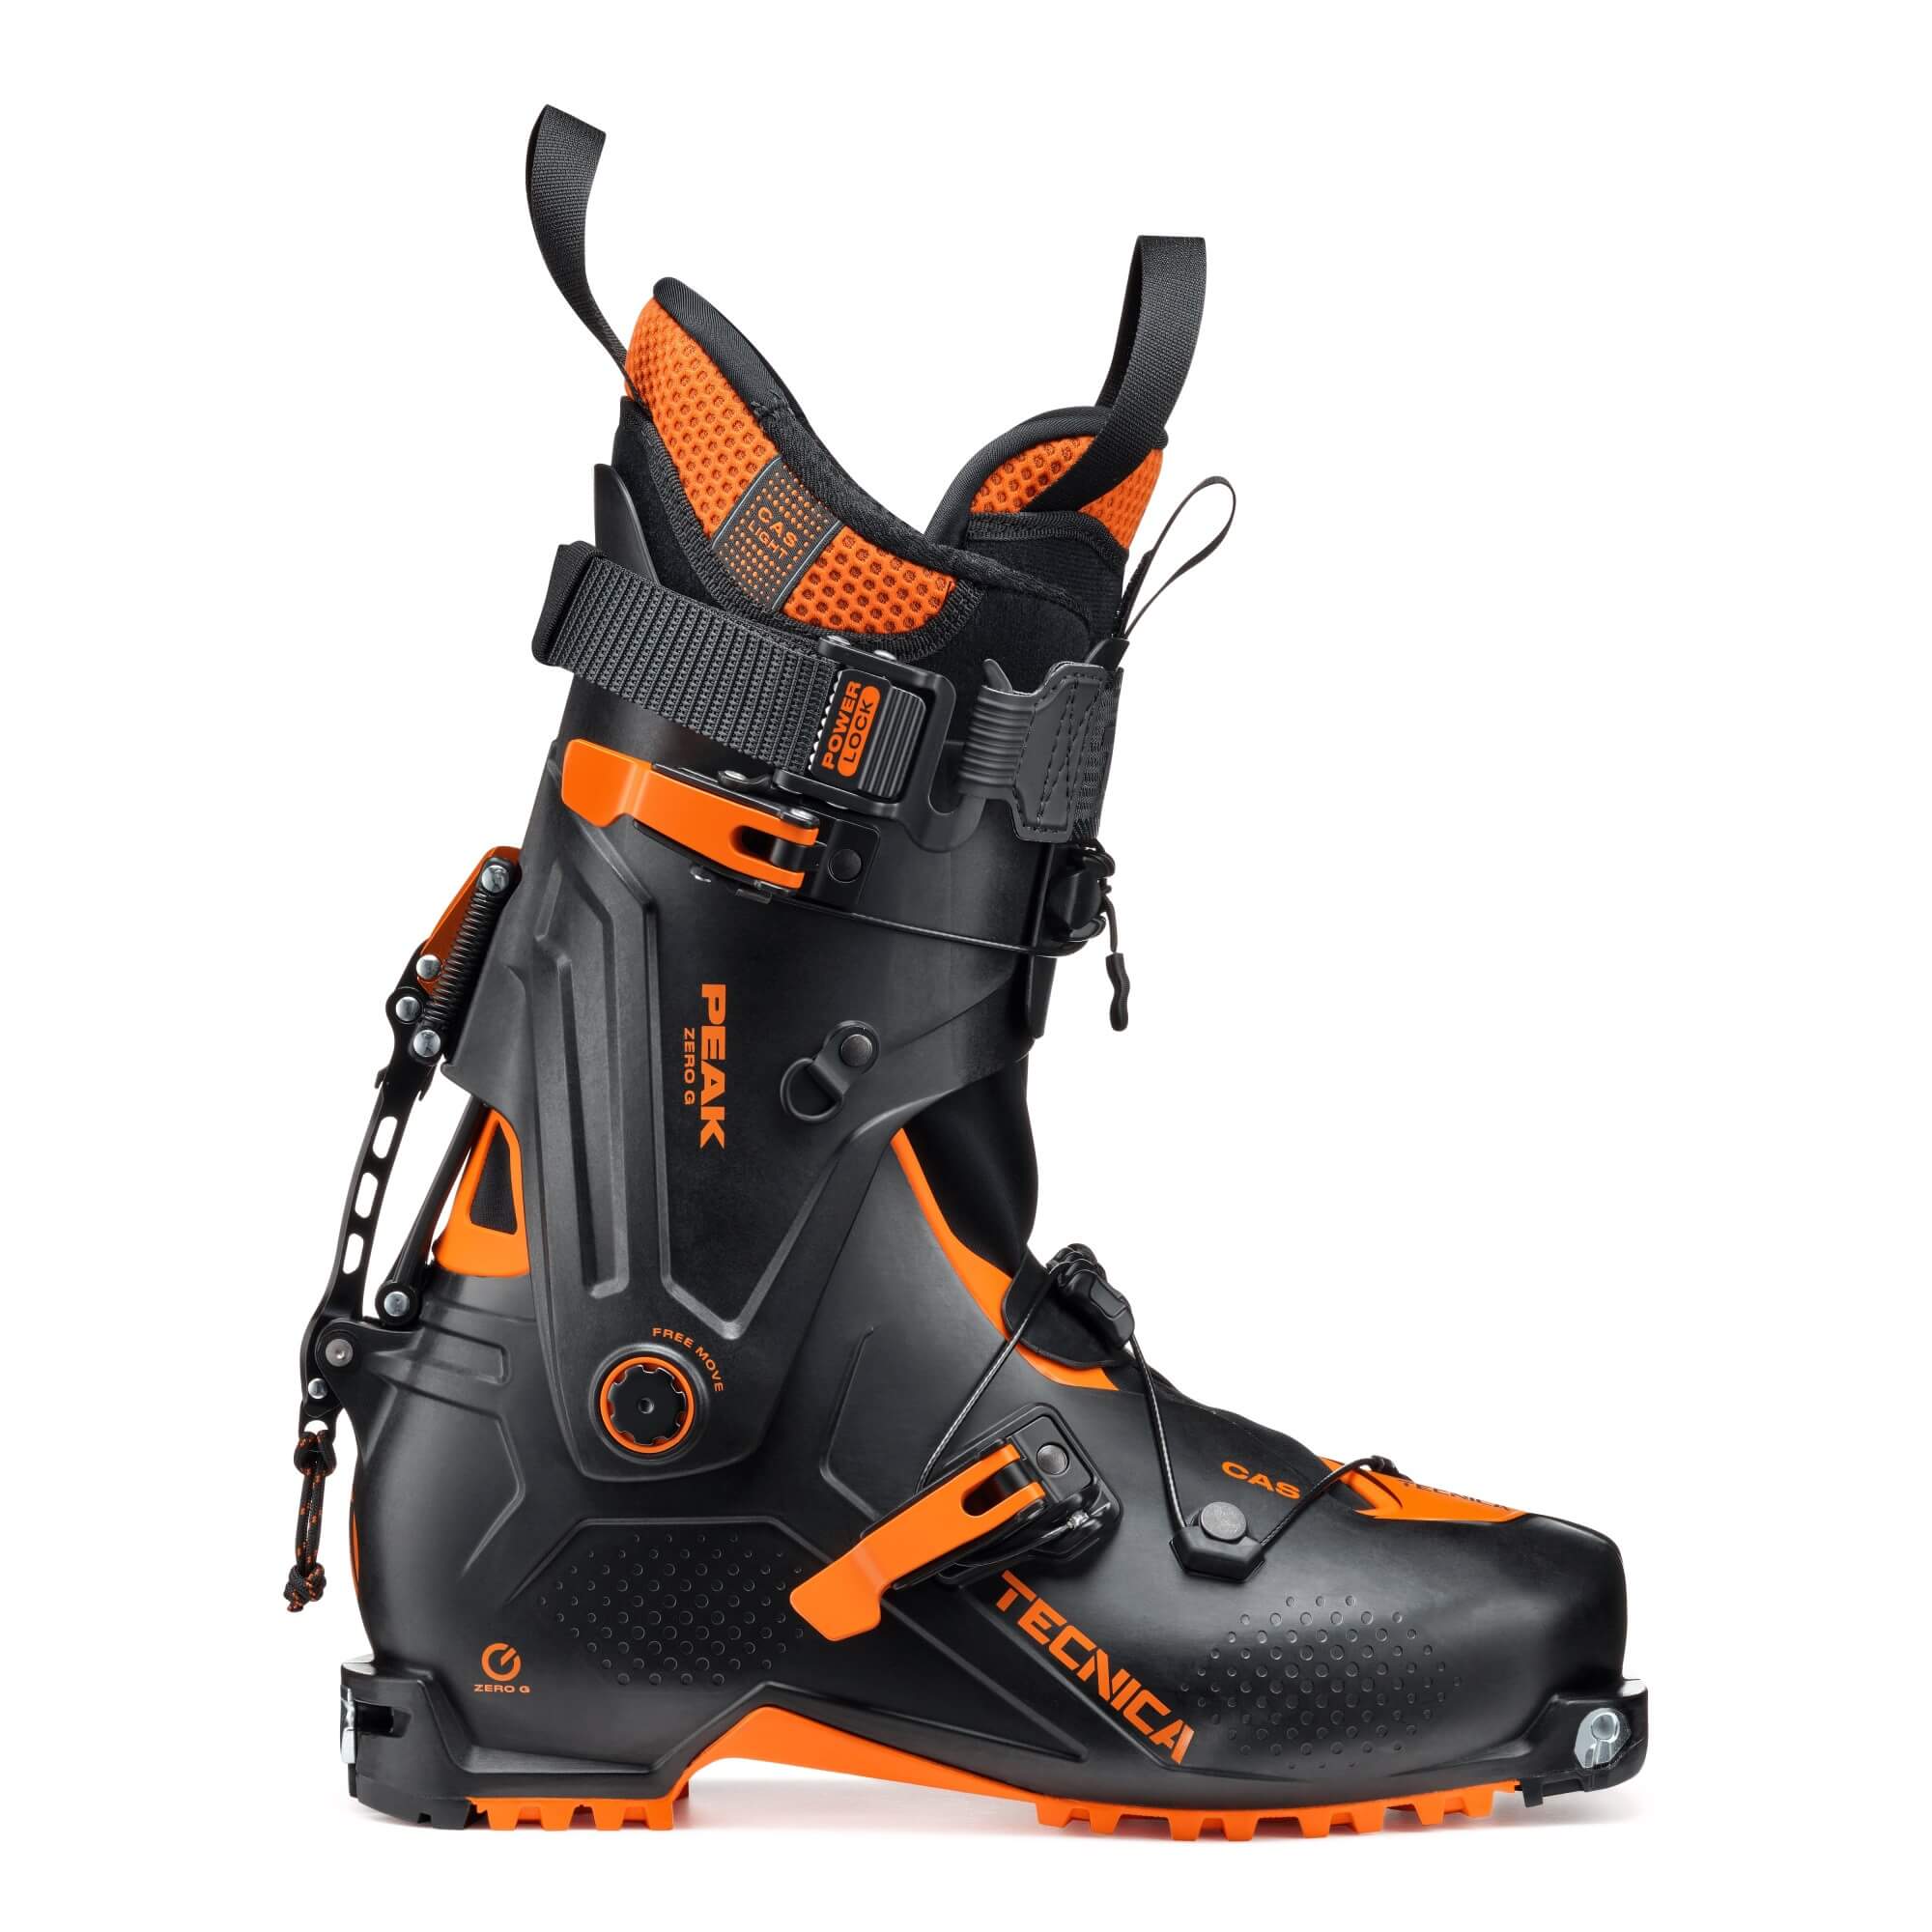 Alpine Touring and Backcountry Ski Boots – Oberson